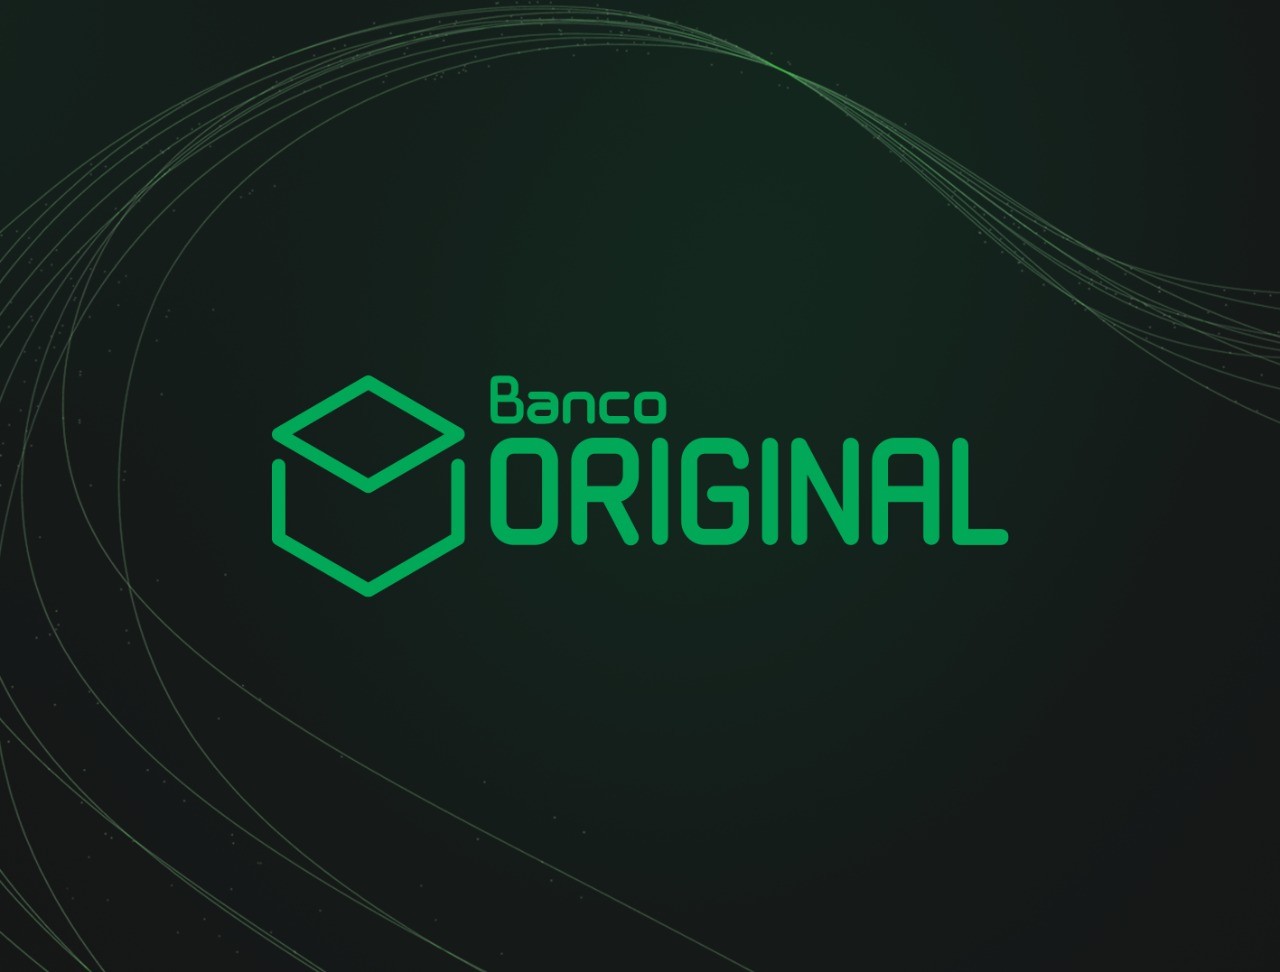 Approximation payments represent 25% of transactions at Banco Original
